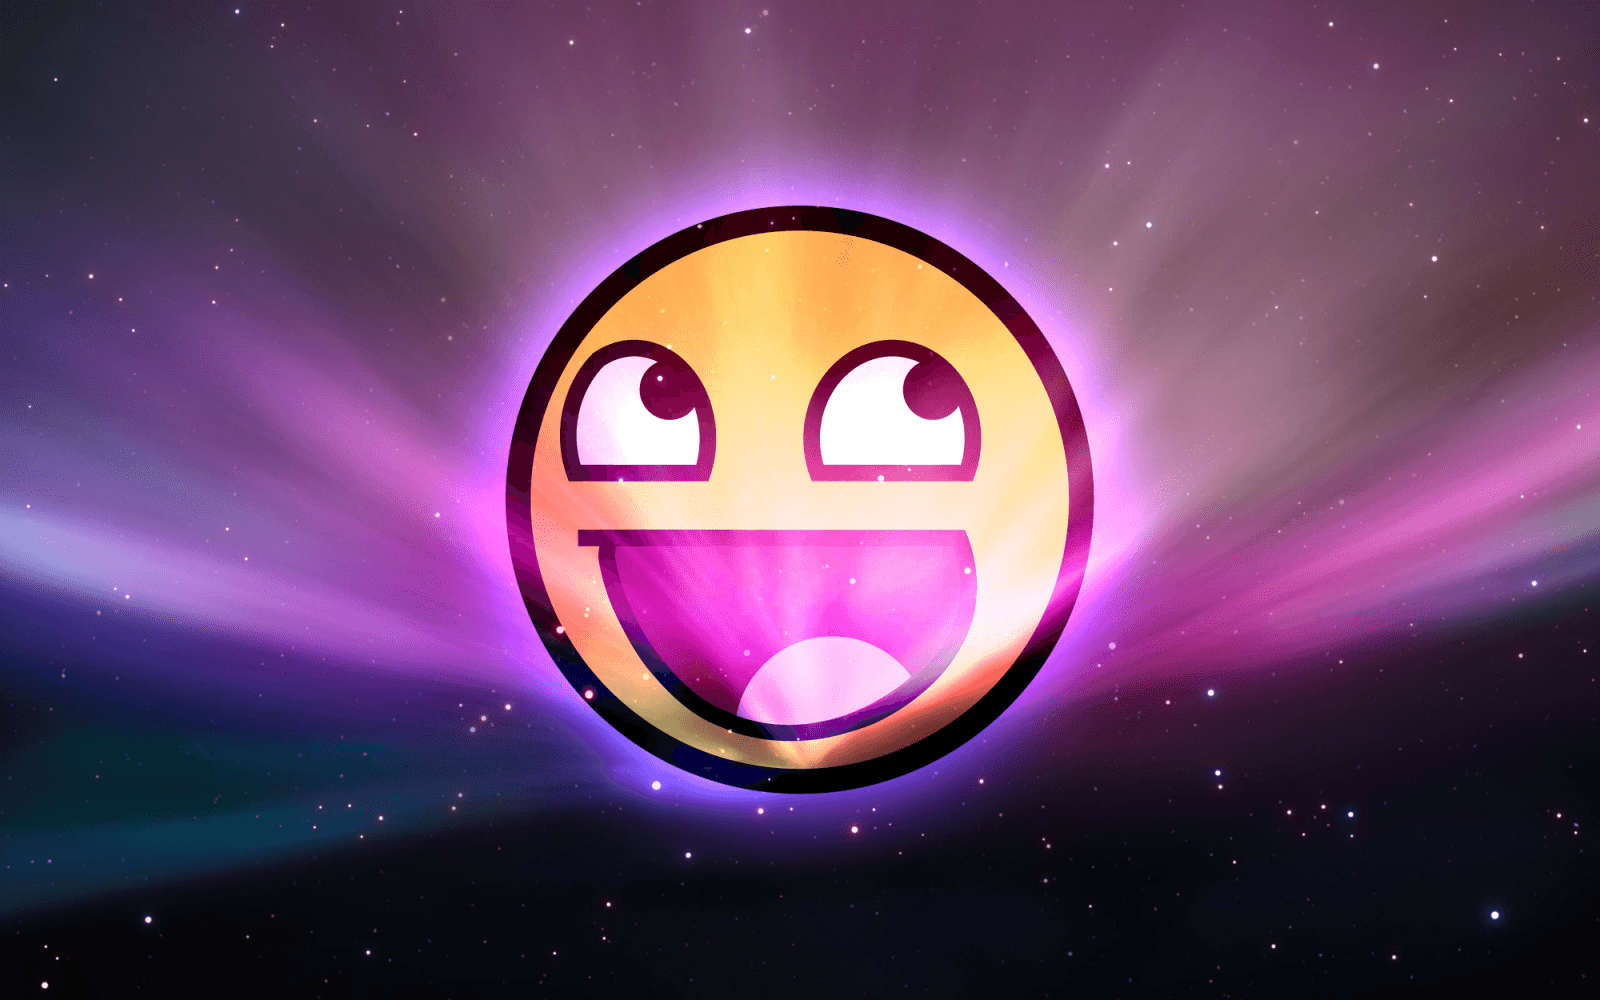 Awesome Face wallpaper HD!